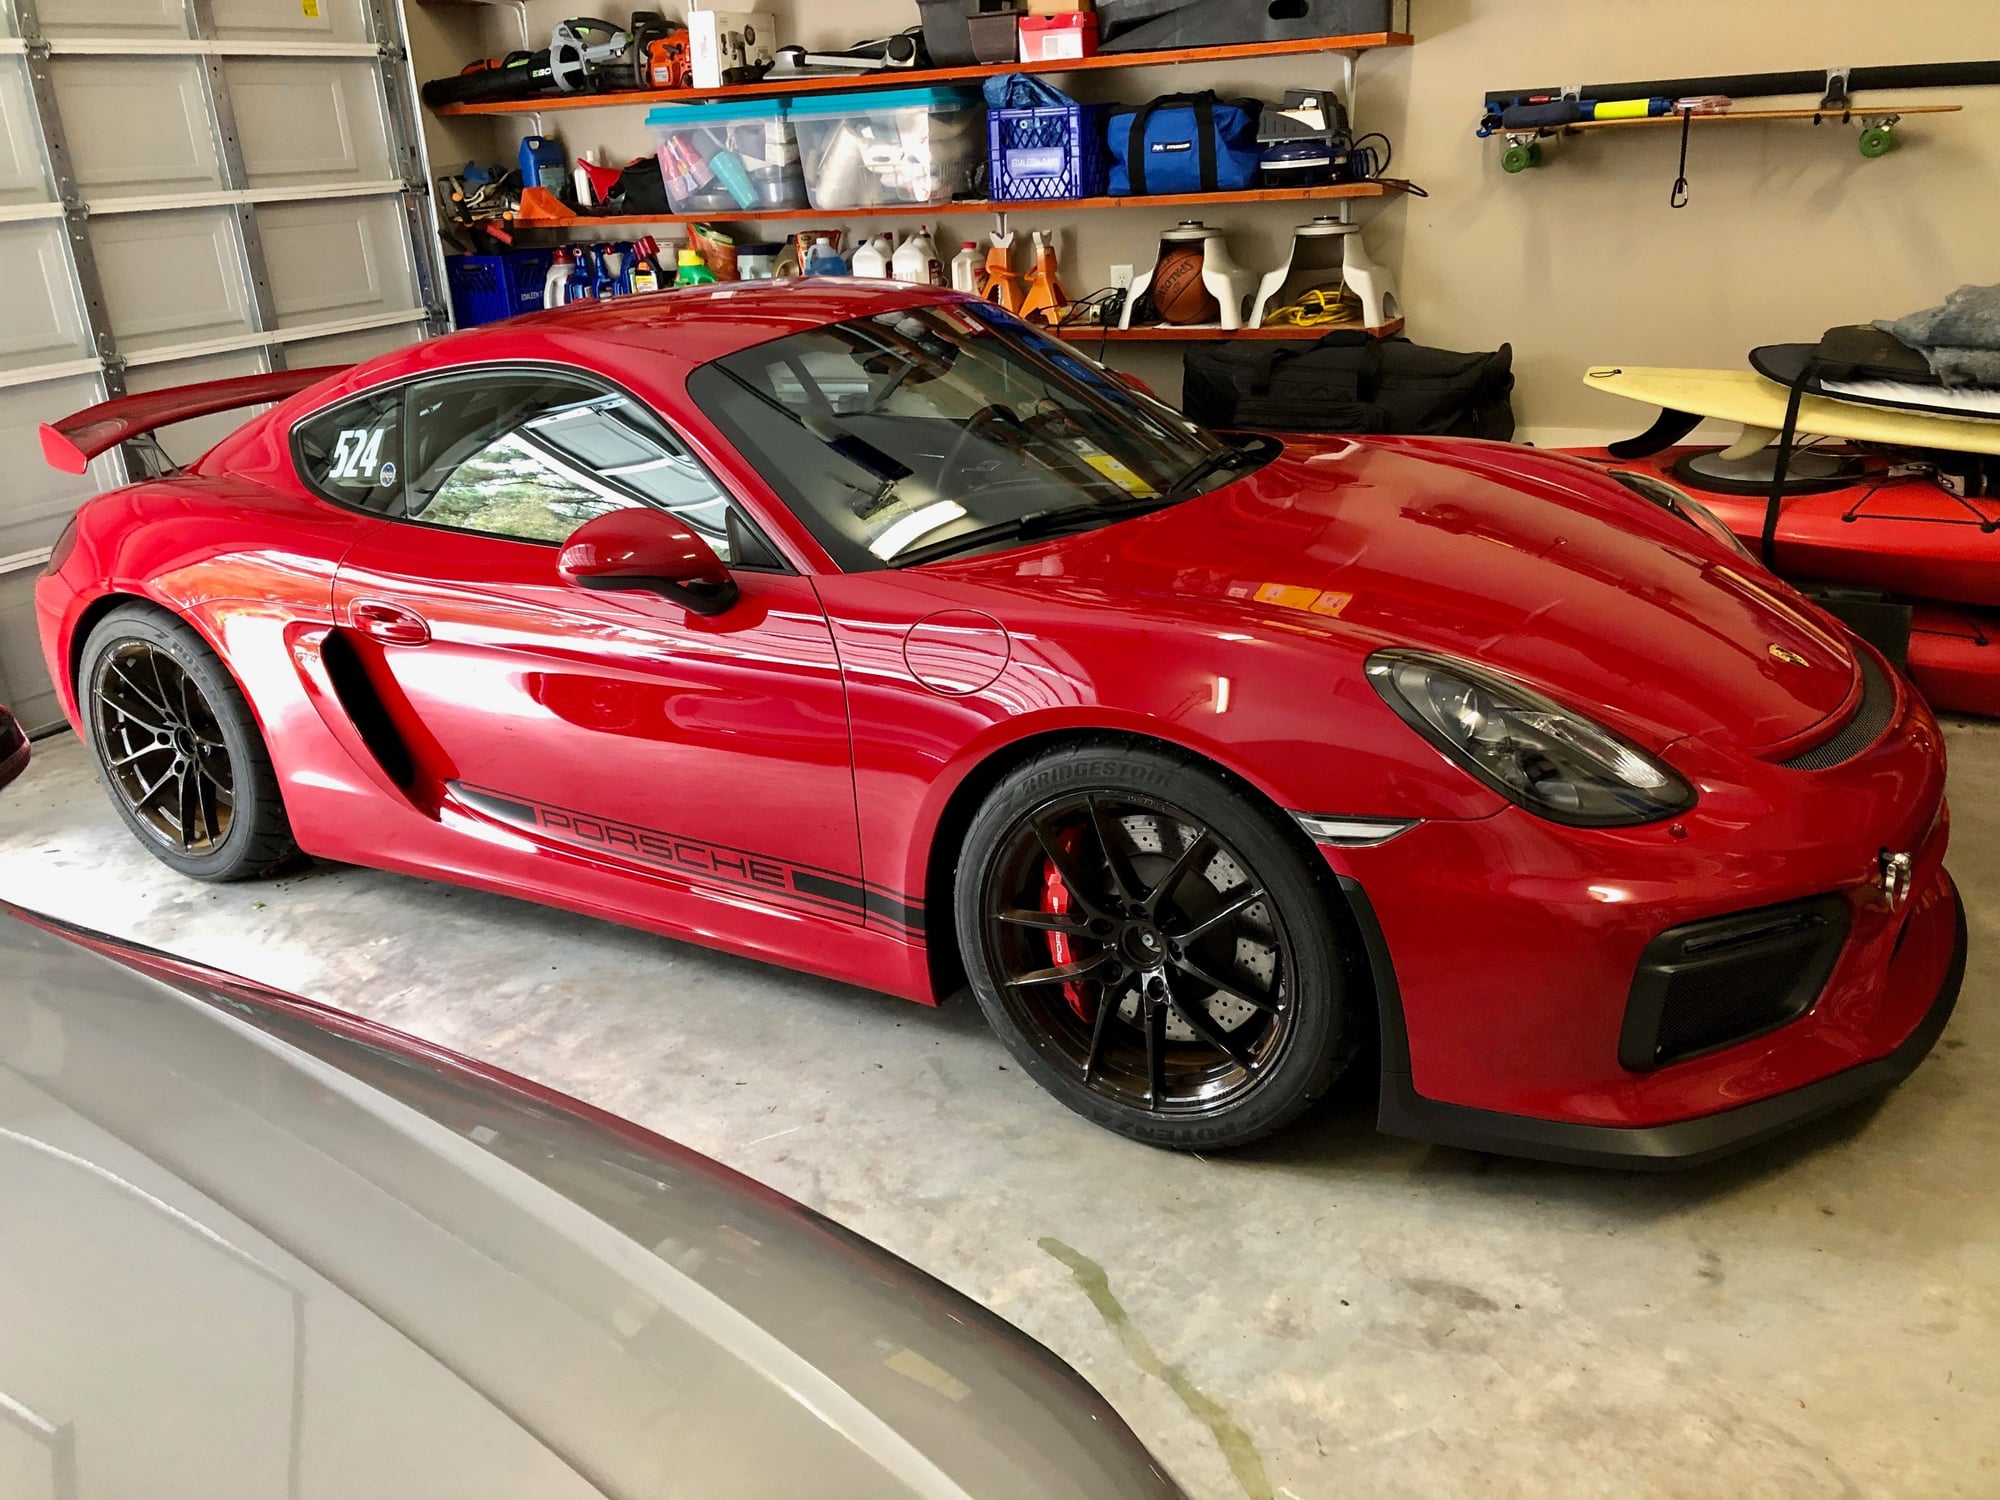 2016 Porsche Cayman GT4 - Porsche Cayman GT4, CPO, Carmine Red,Loaded, ATC Trailer, Track Wheels - Used - VIN WP0AC2A81GK192331 - 13,600 Miles - 6 cyl - 2WD - Manual - Coupe - Red - Sanford, NC 27332, United States